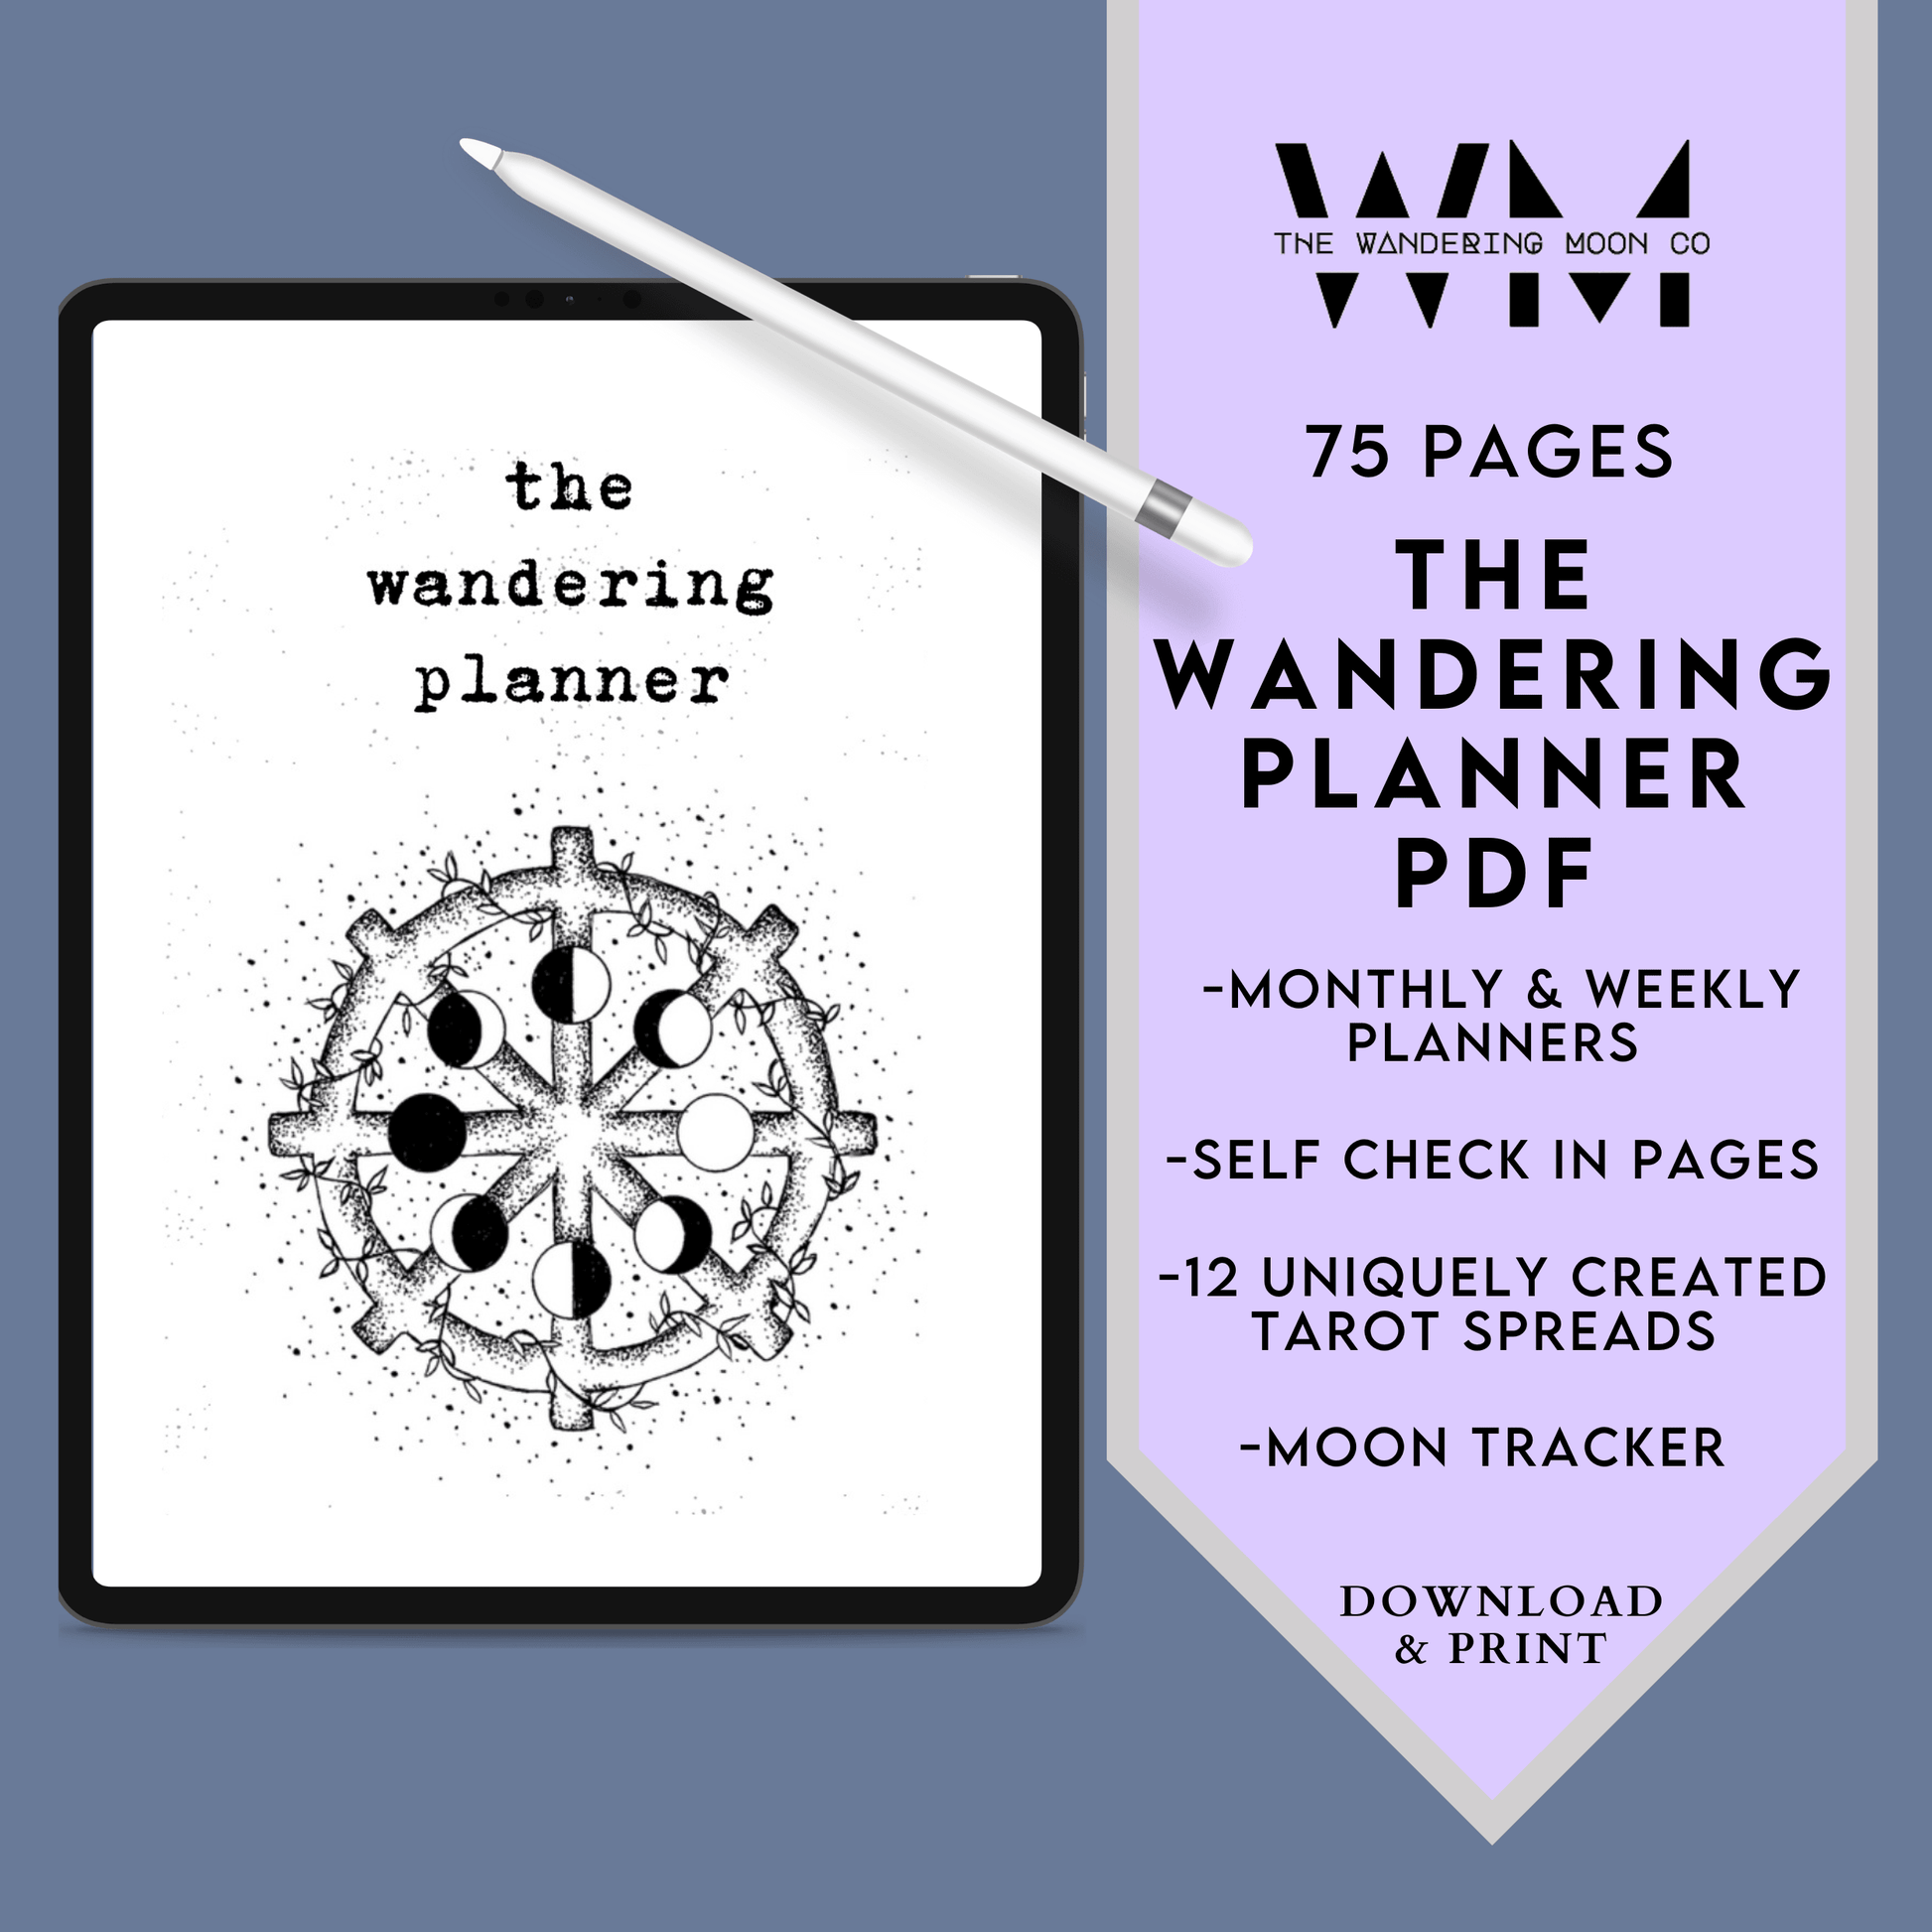 a graphic showing the focus points of the wandering planner journal